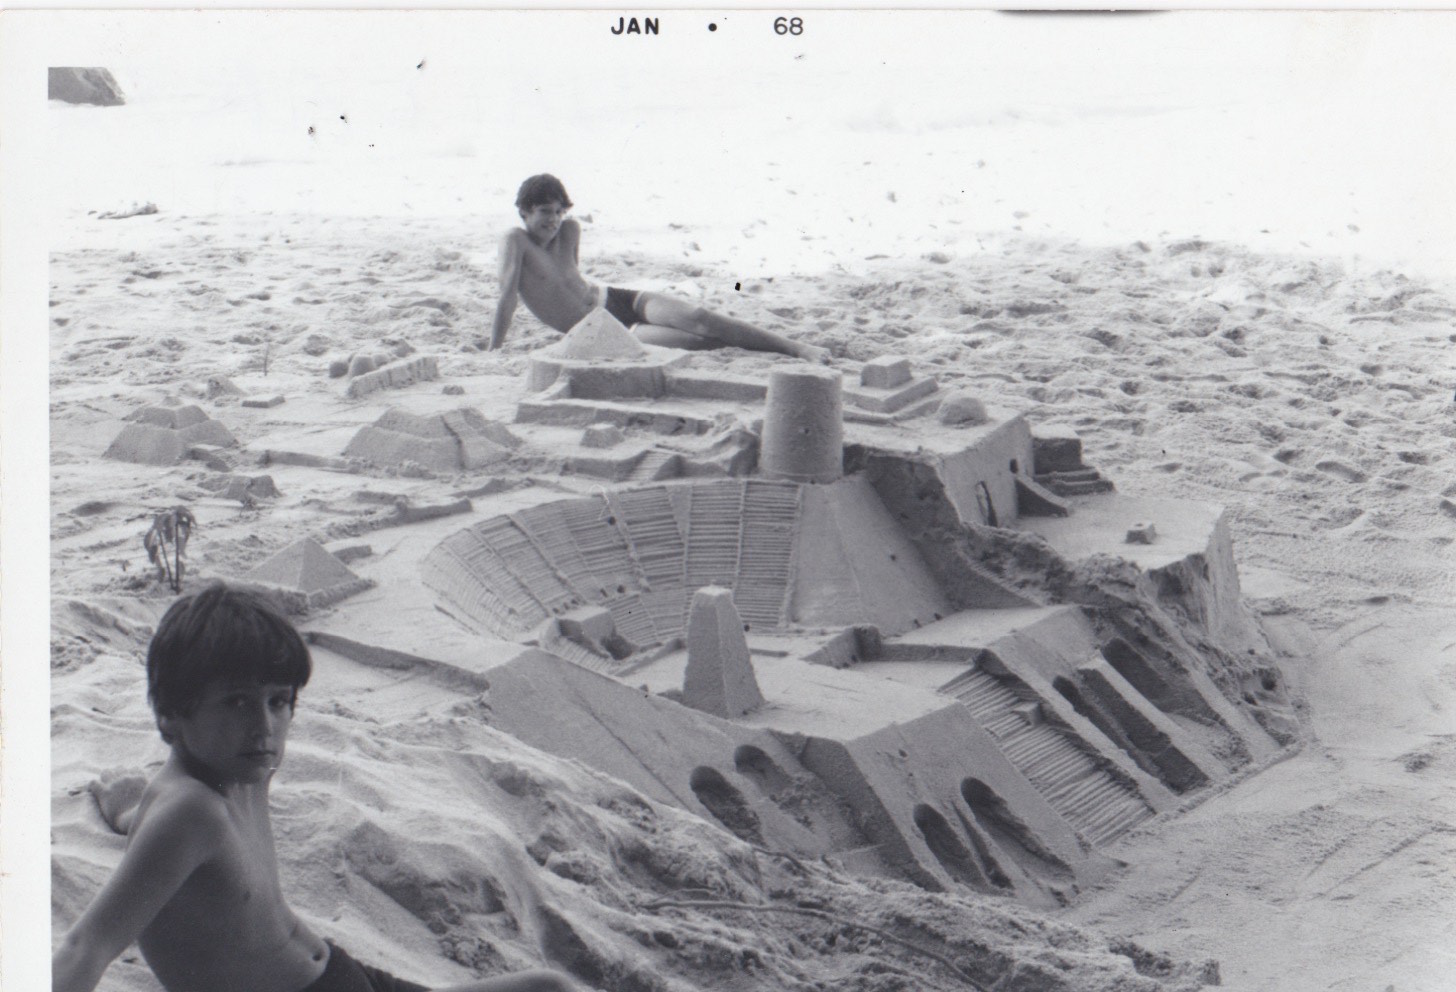 Caio and Bruno Fonseca with Gonzalo Fonseca Sand Sculpture, Mexico, 1968.jpg